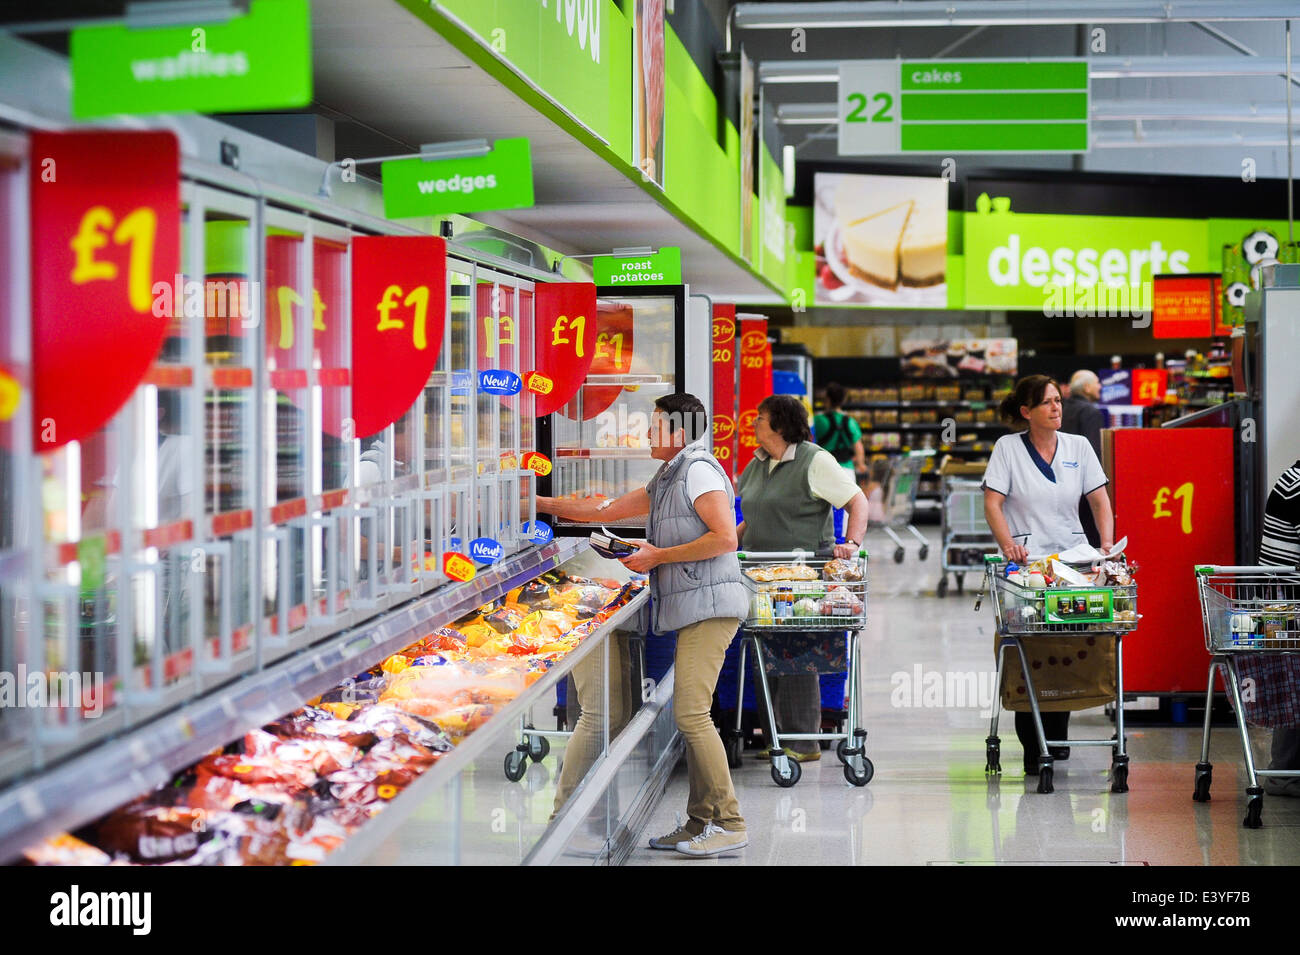 shoppers shopping in the freezer aisles of ASDA supermarket in the UK Stock Photo